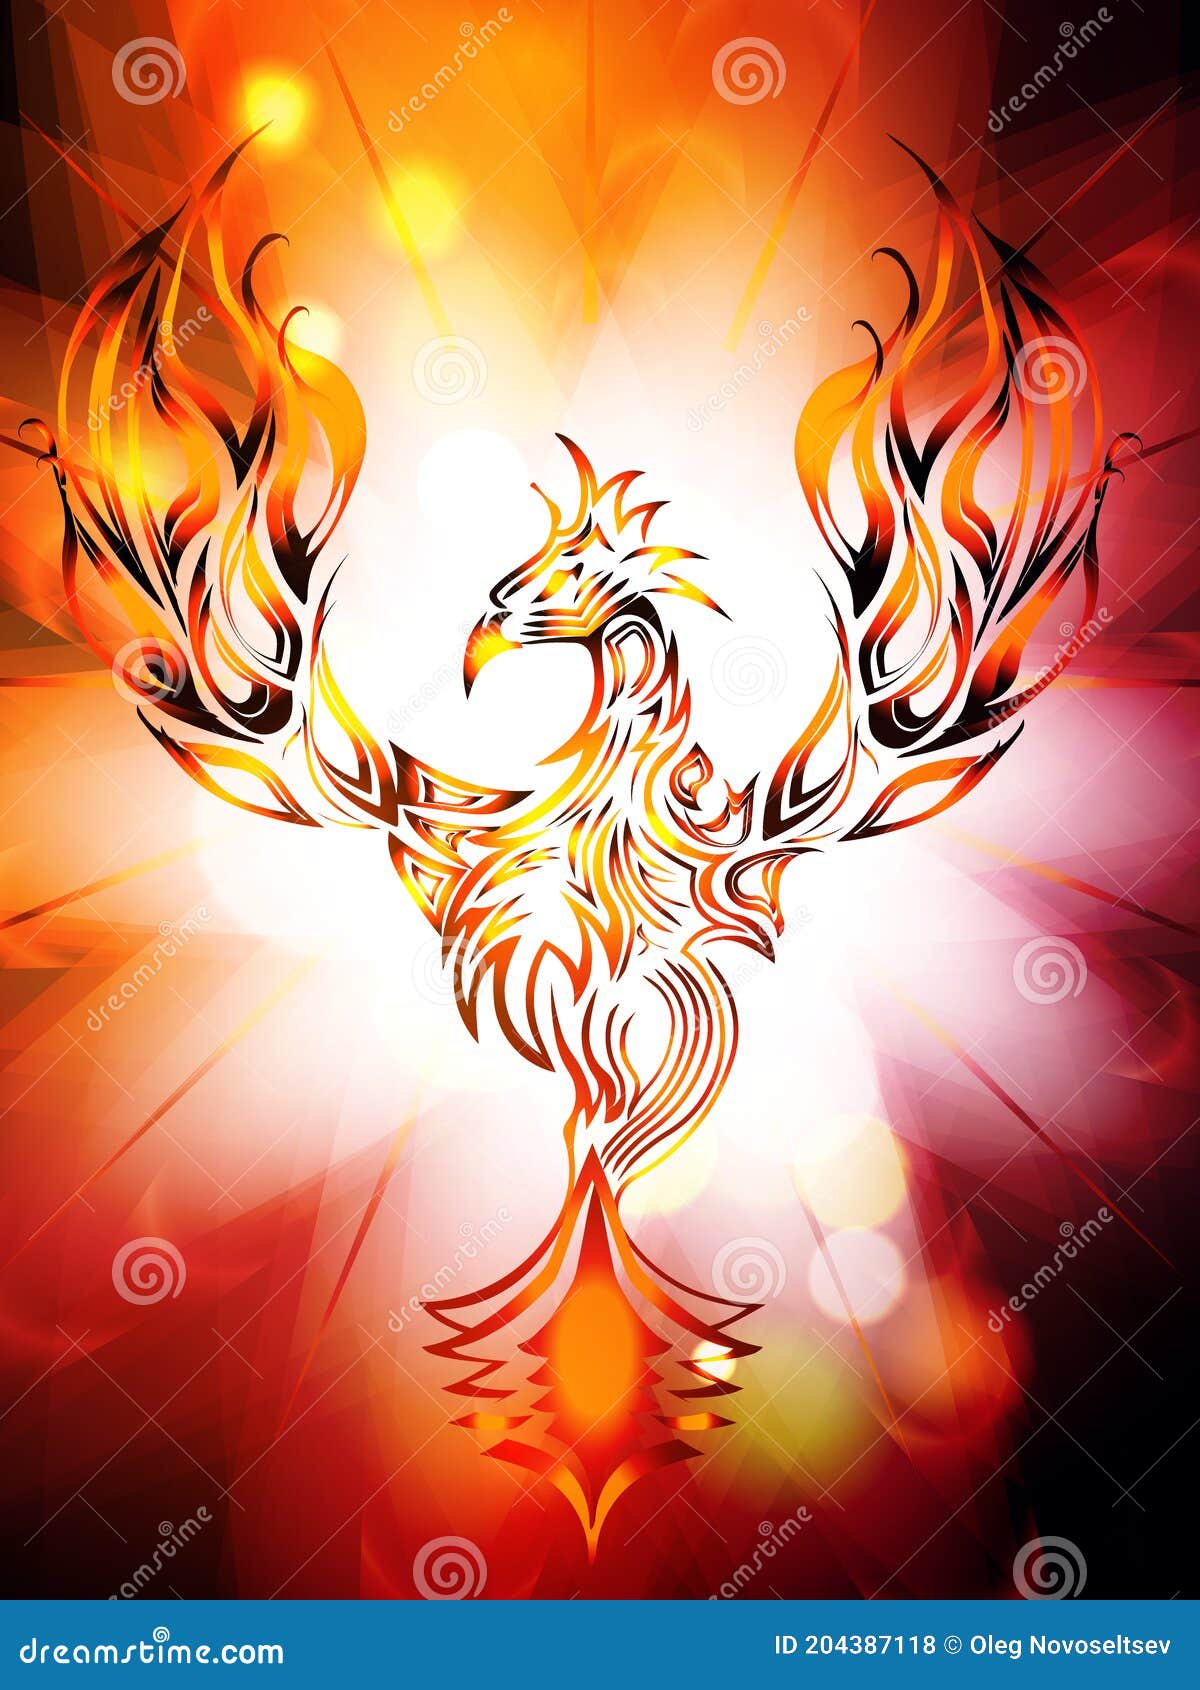  of rising phoenix against red dark background as  of rebirth. s are layered separately in  file.